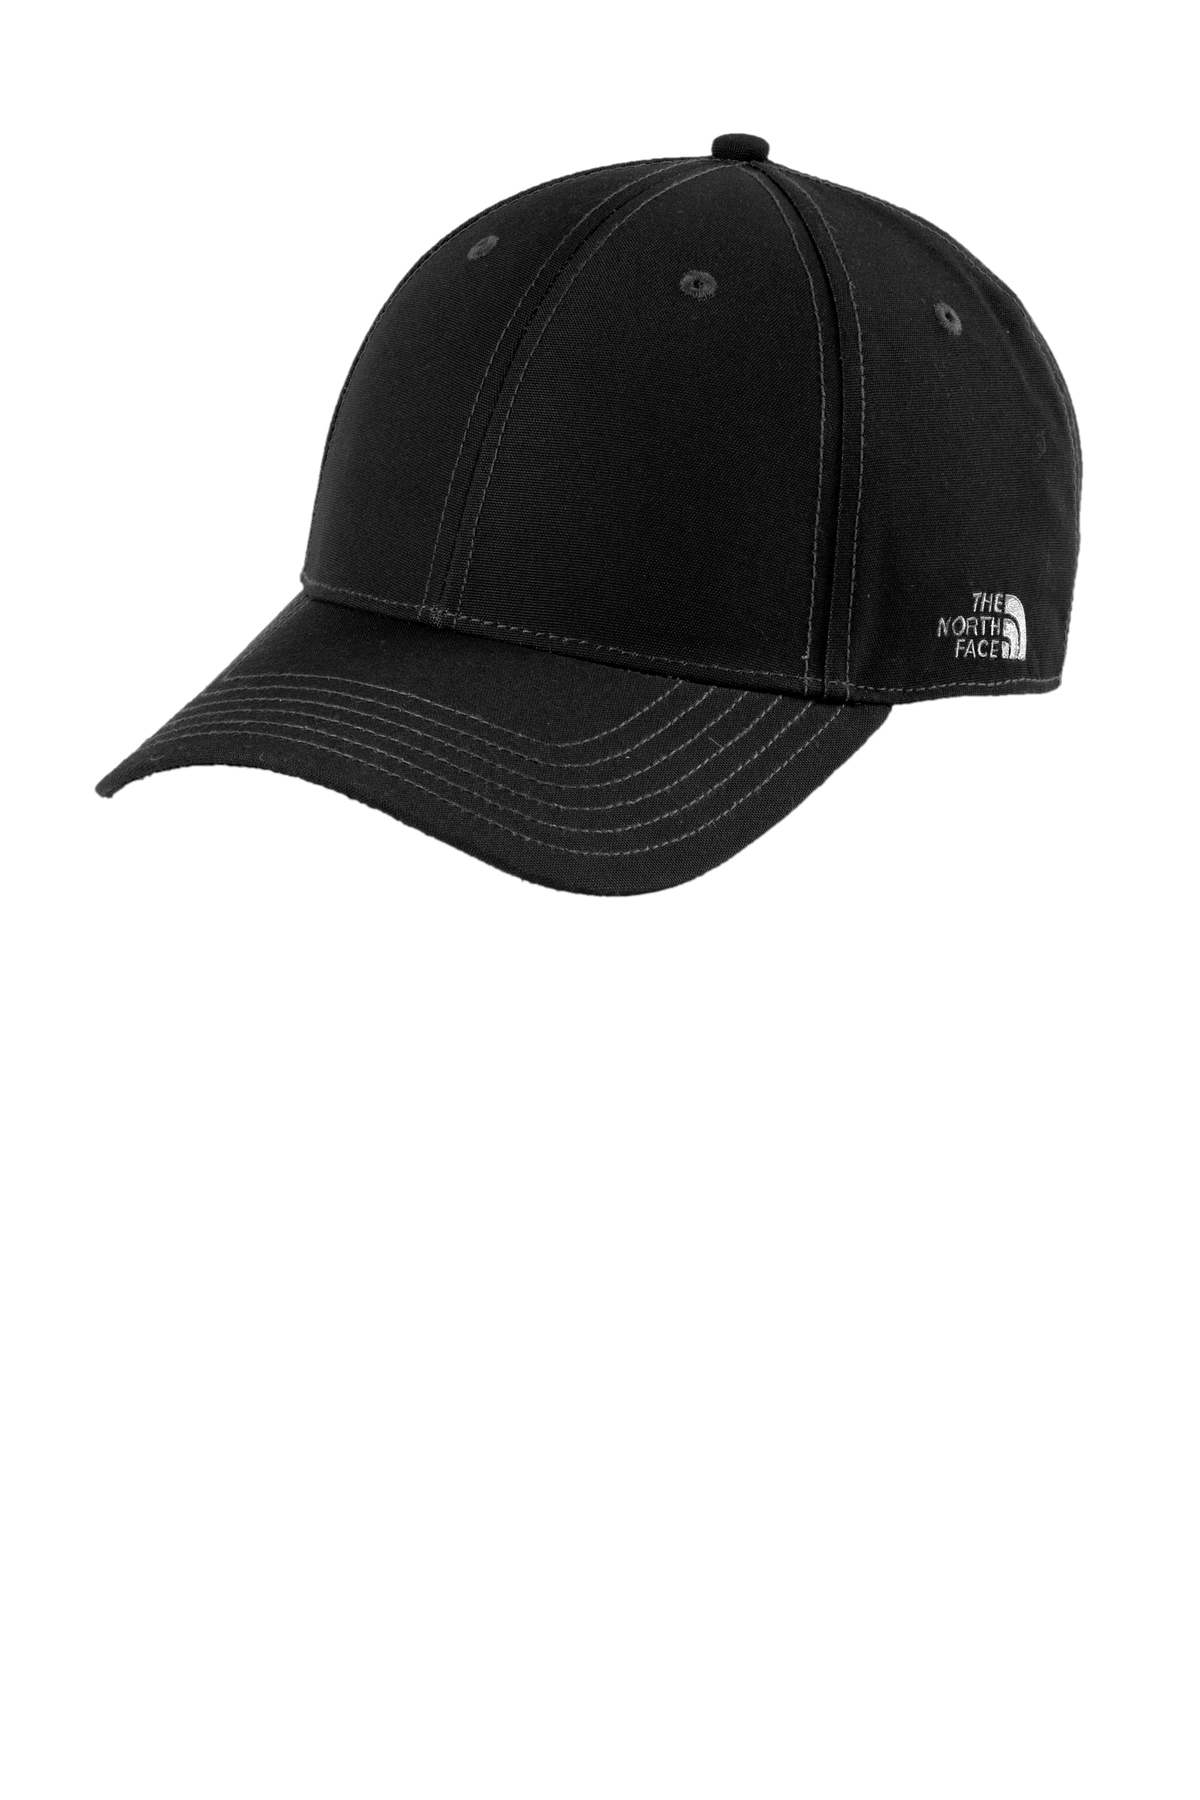 The North Face® Recycled Cap.